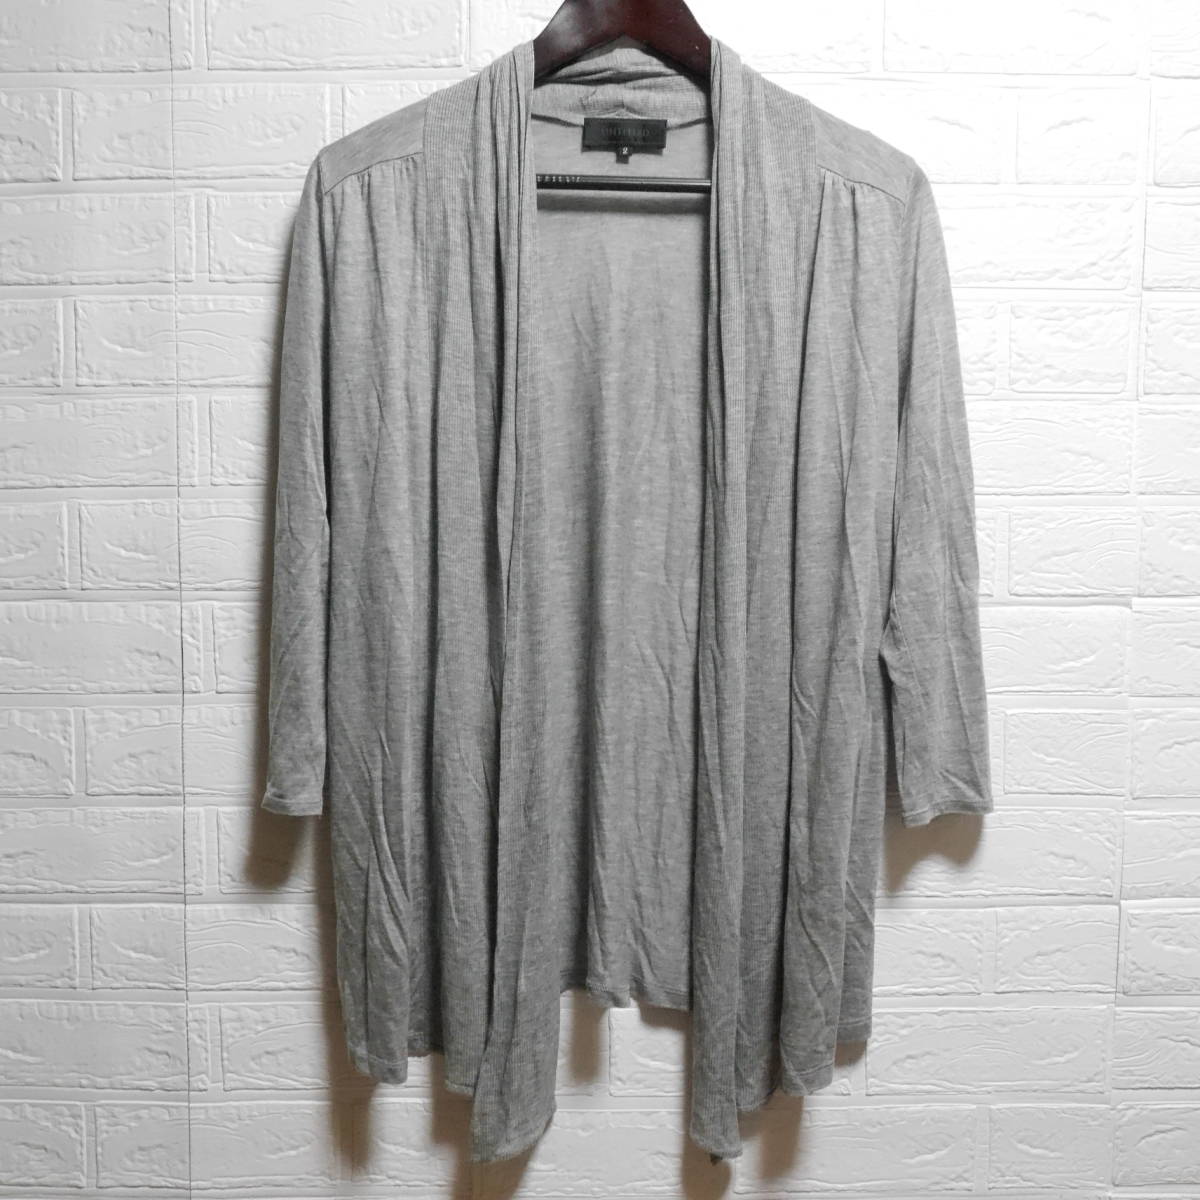 A428 * UNTITLED | Untitled front opening cardigan gray used size 2